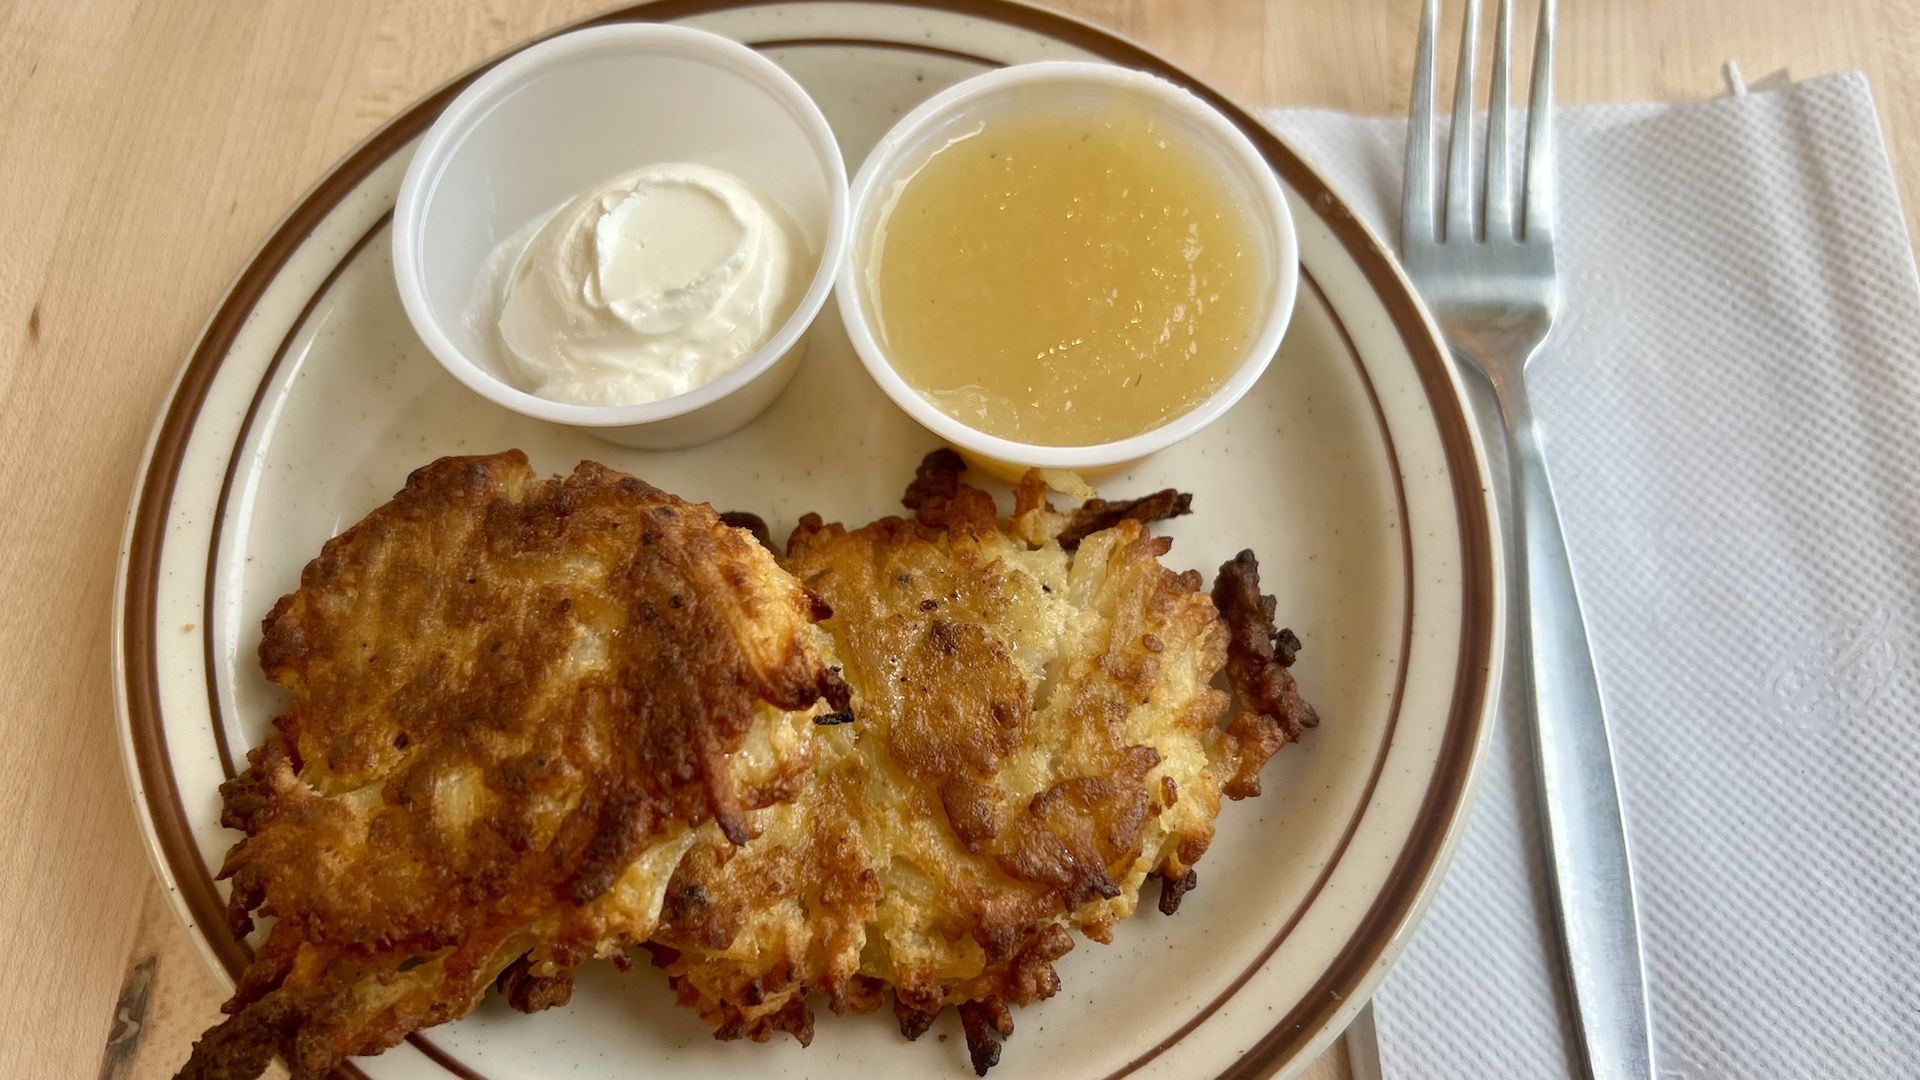 Potato pancakes on plate with cups of sour cream and applesauce with plastic fork next to plate.